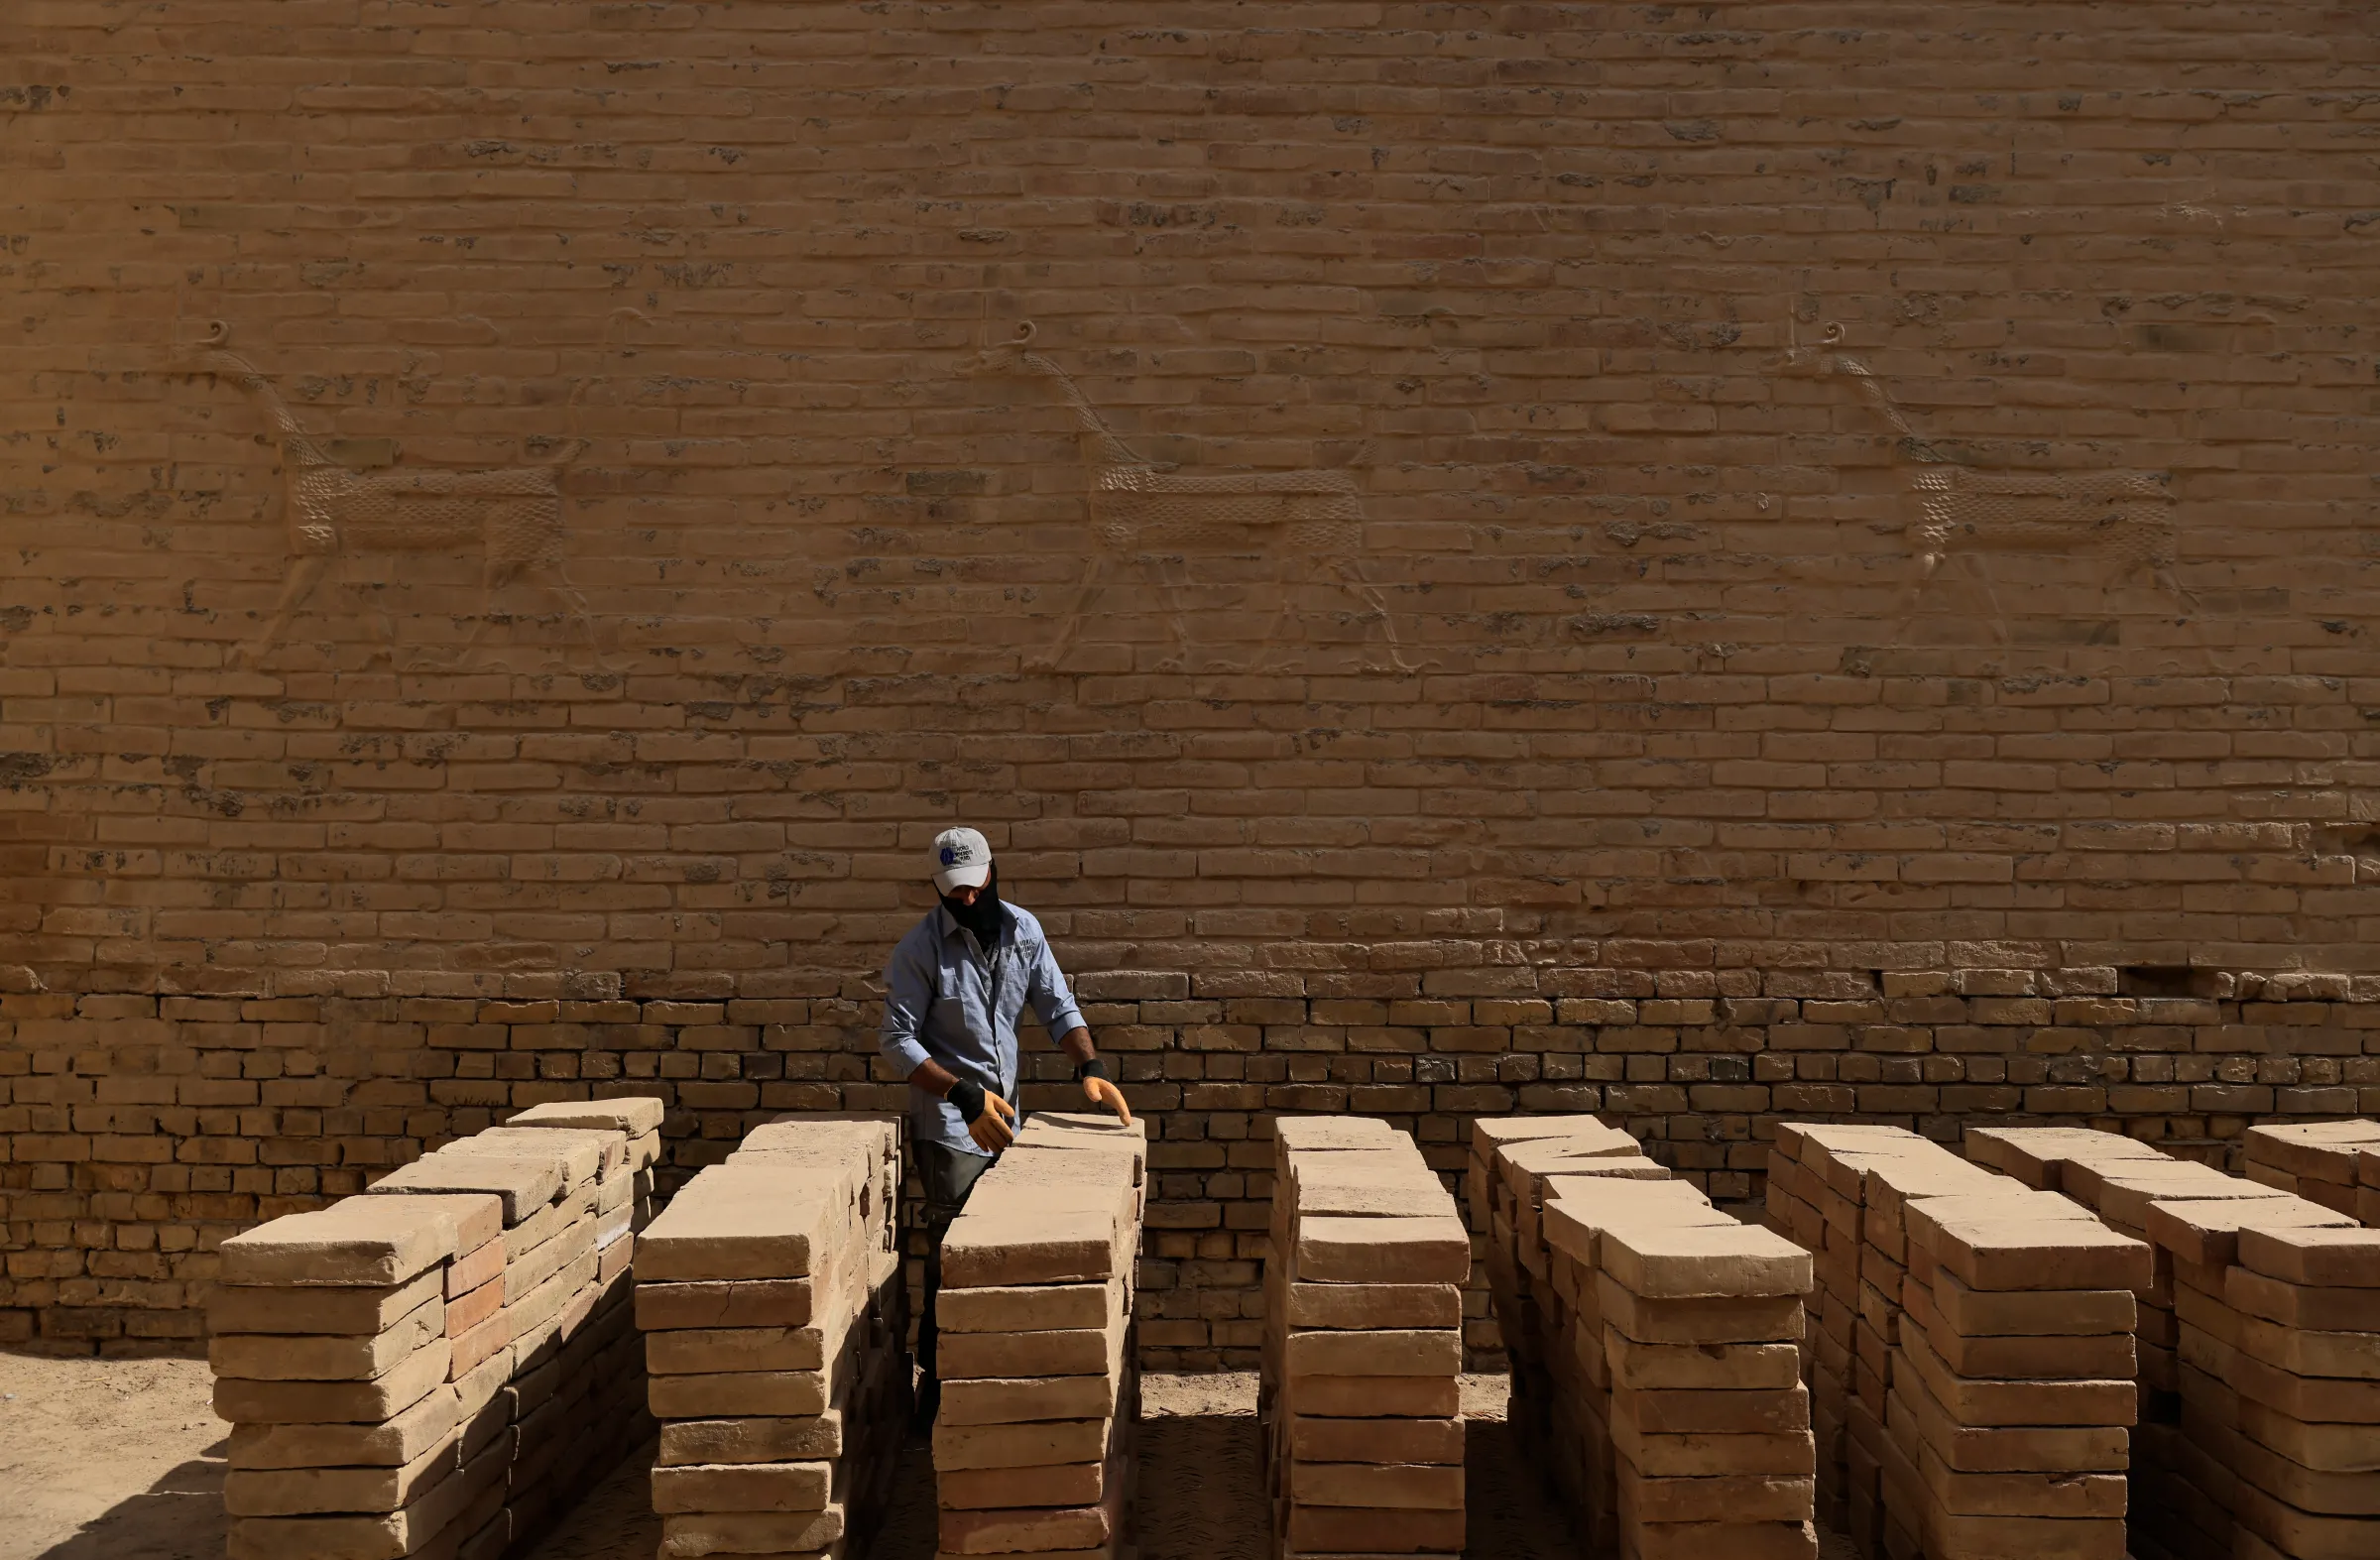 A worker from World Monument Fund sets out sun-crude bricks in the ancient city of Babylon, Iraq, October 13, 2022